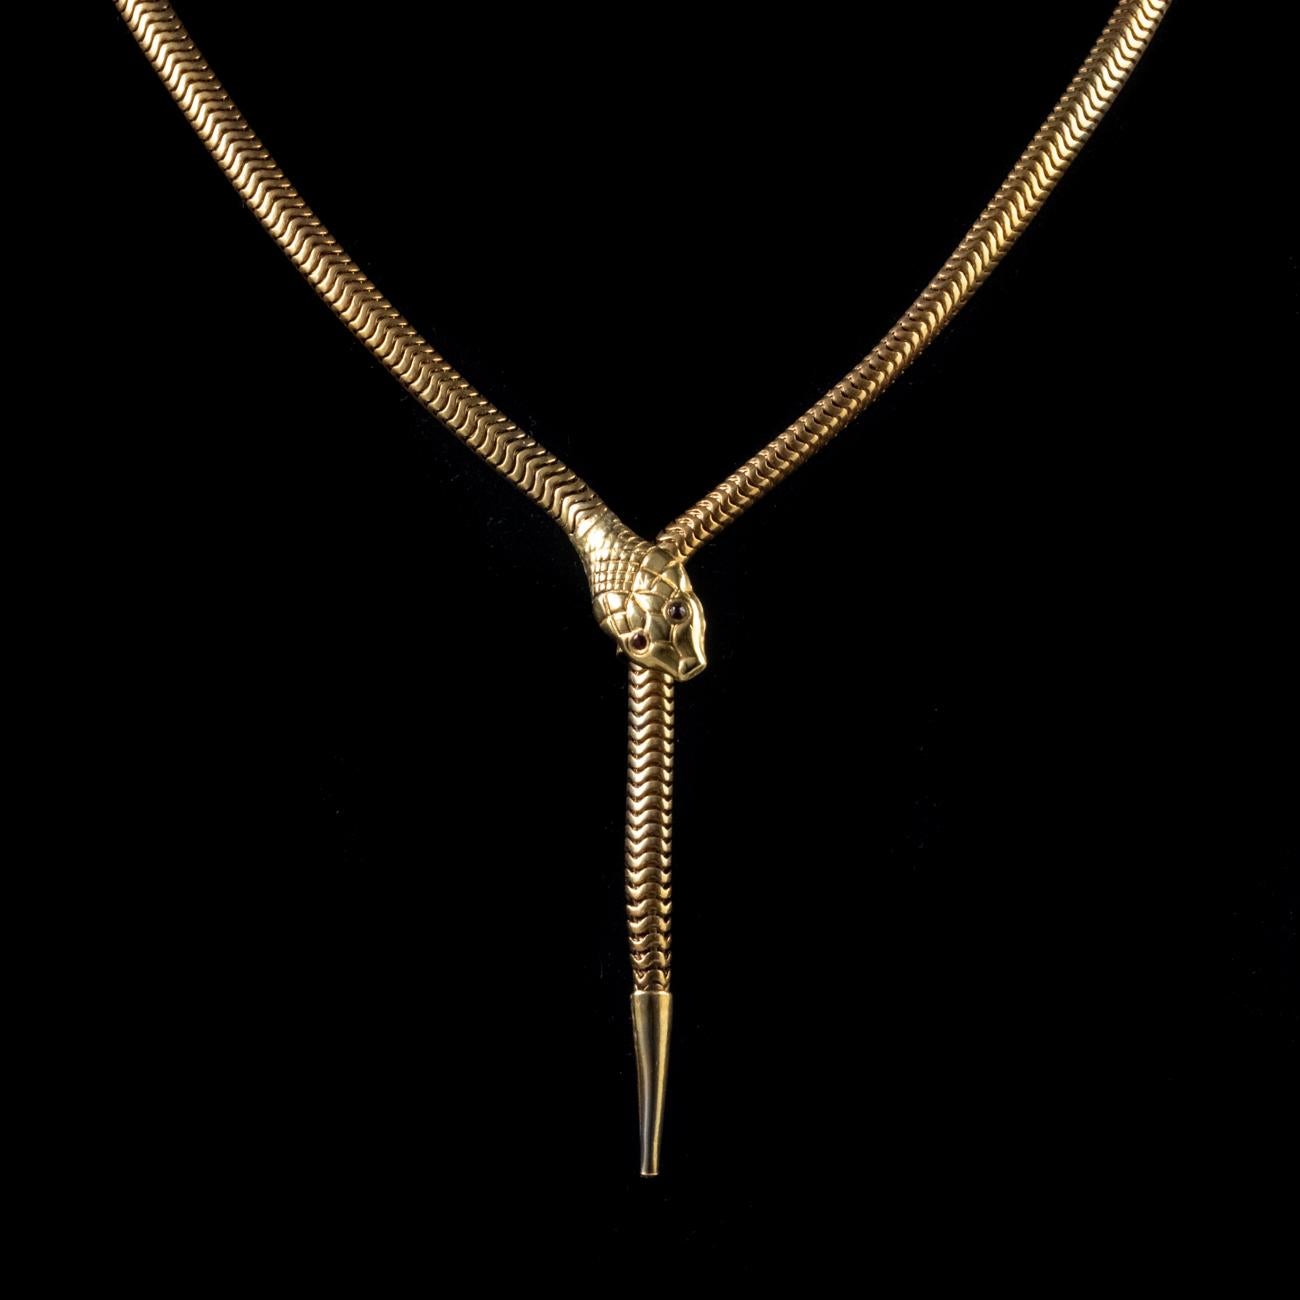 This fantastic Antique Victorian necklace has been commissioned in Silver and gilded with 18ct Yellow Gold. It is designed to represent the form of a snake with the head and tail coming together to form a slider clasp. It features articulated links